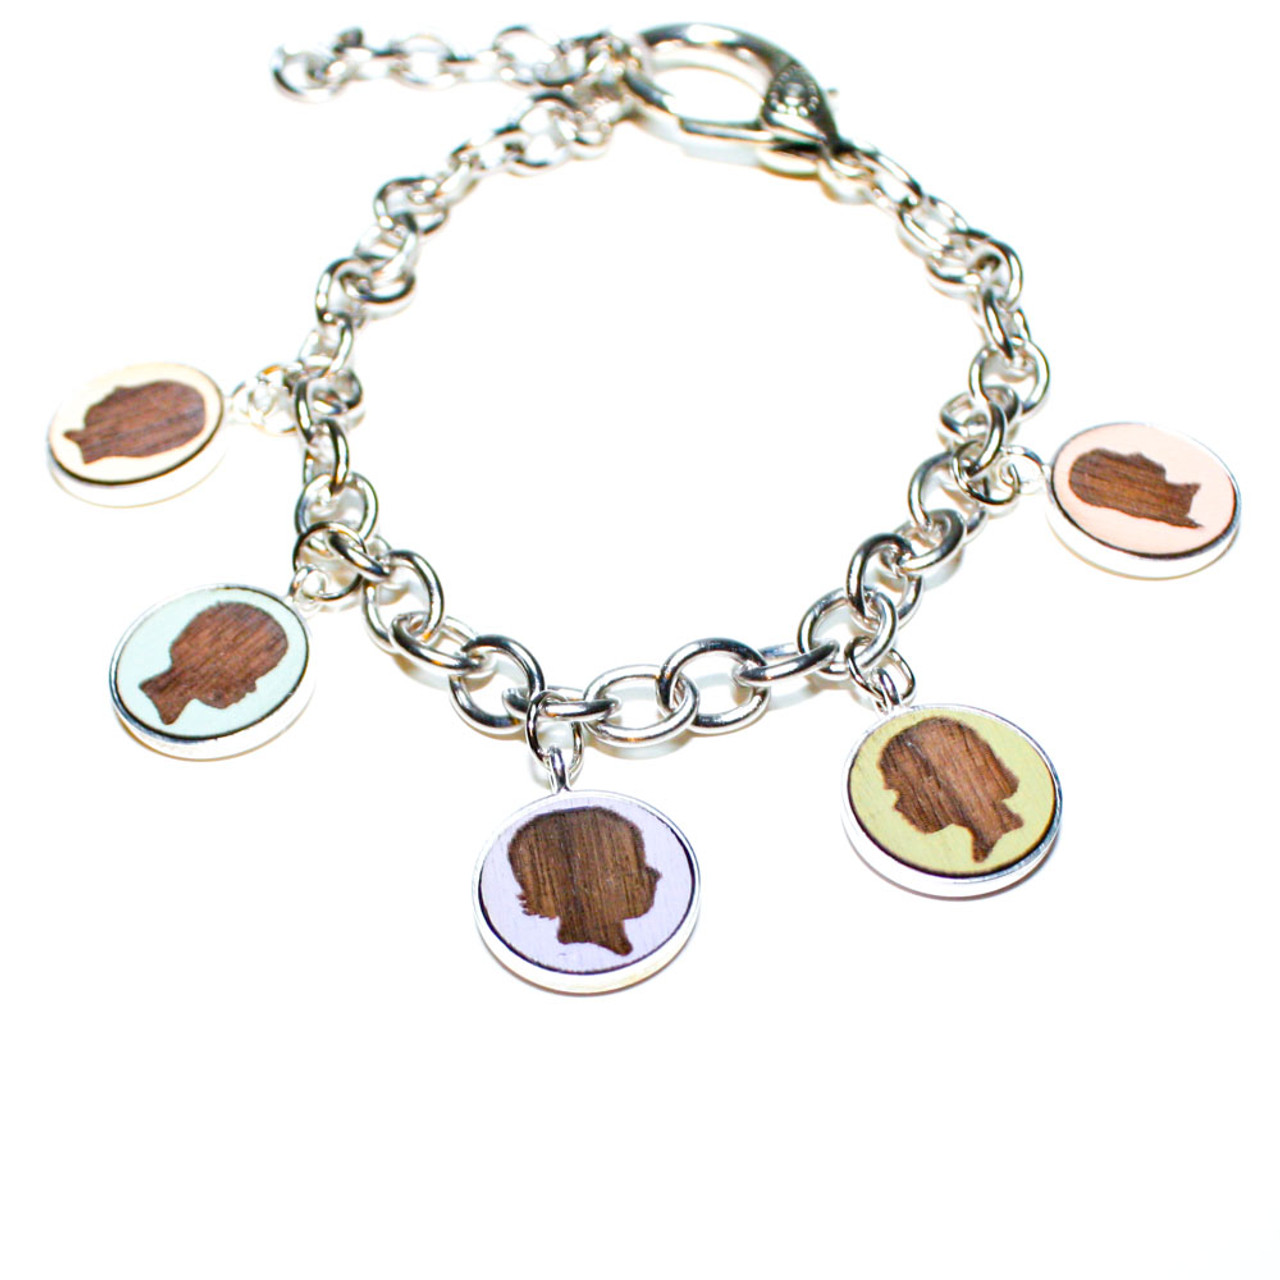 Custom charms for bracelets offer a unique and personalized way to express individual style, commemorate